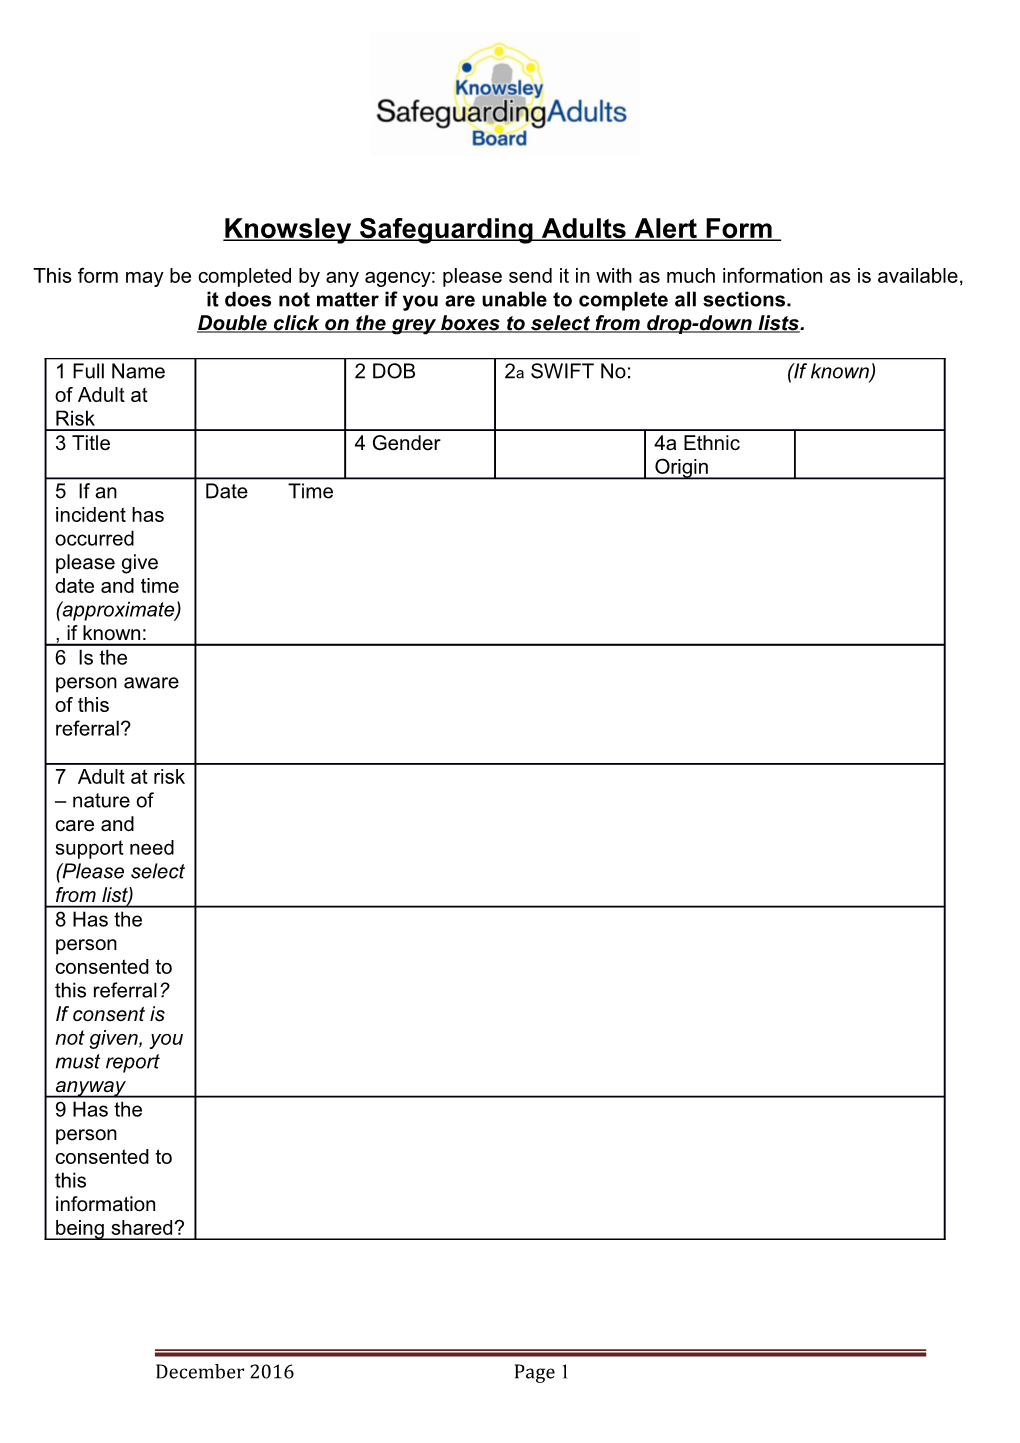 Knowsley Safeguarding Adults Alert Form (Draft)